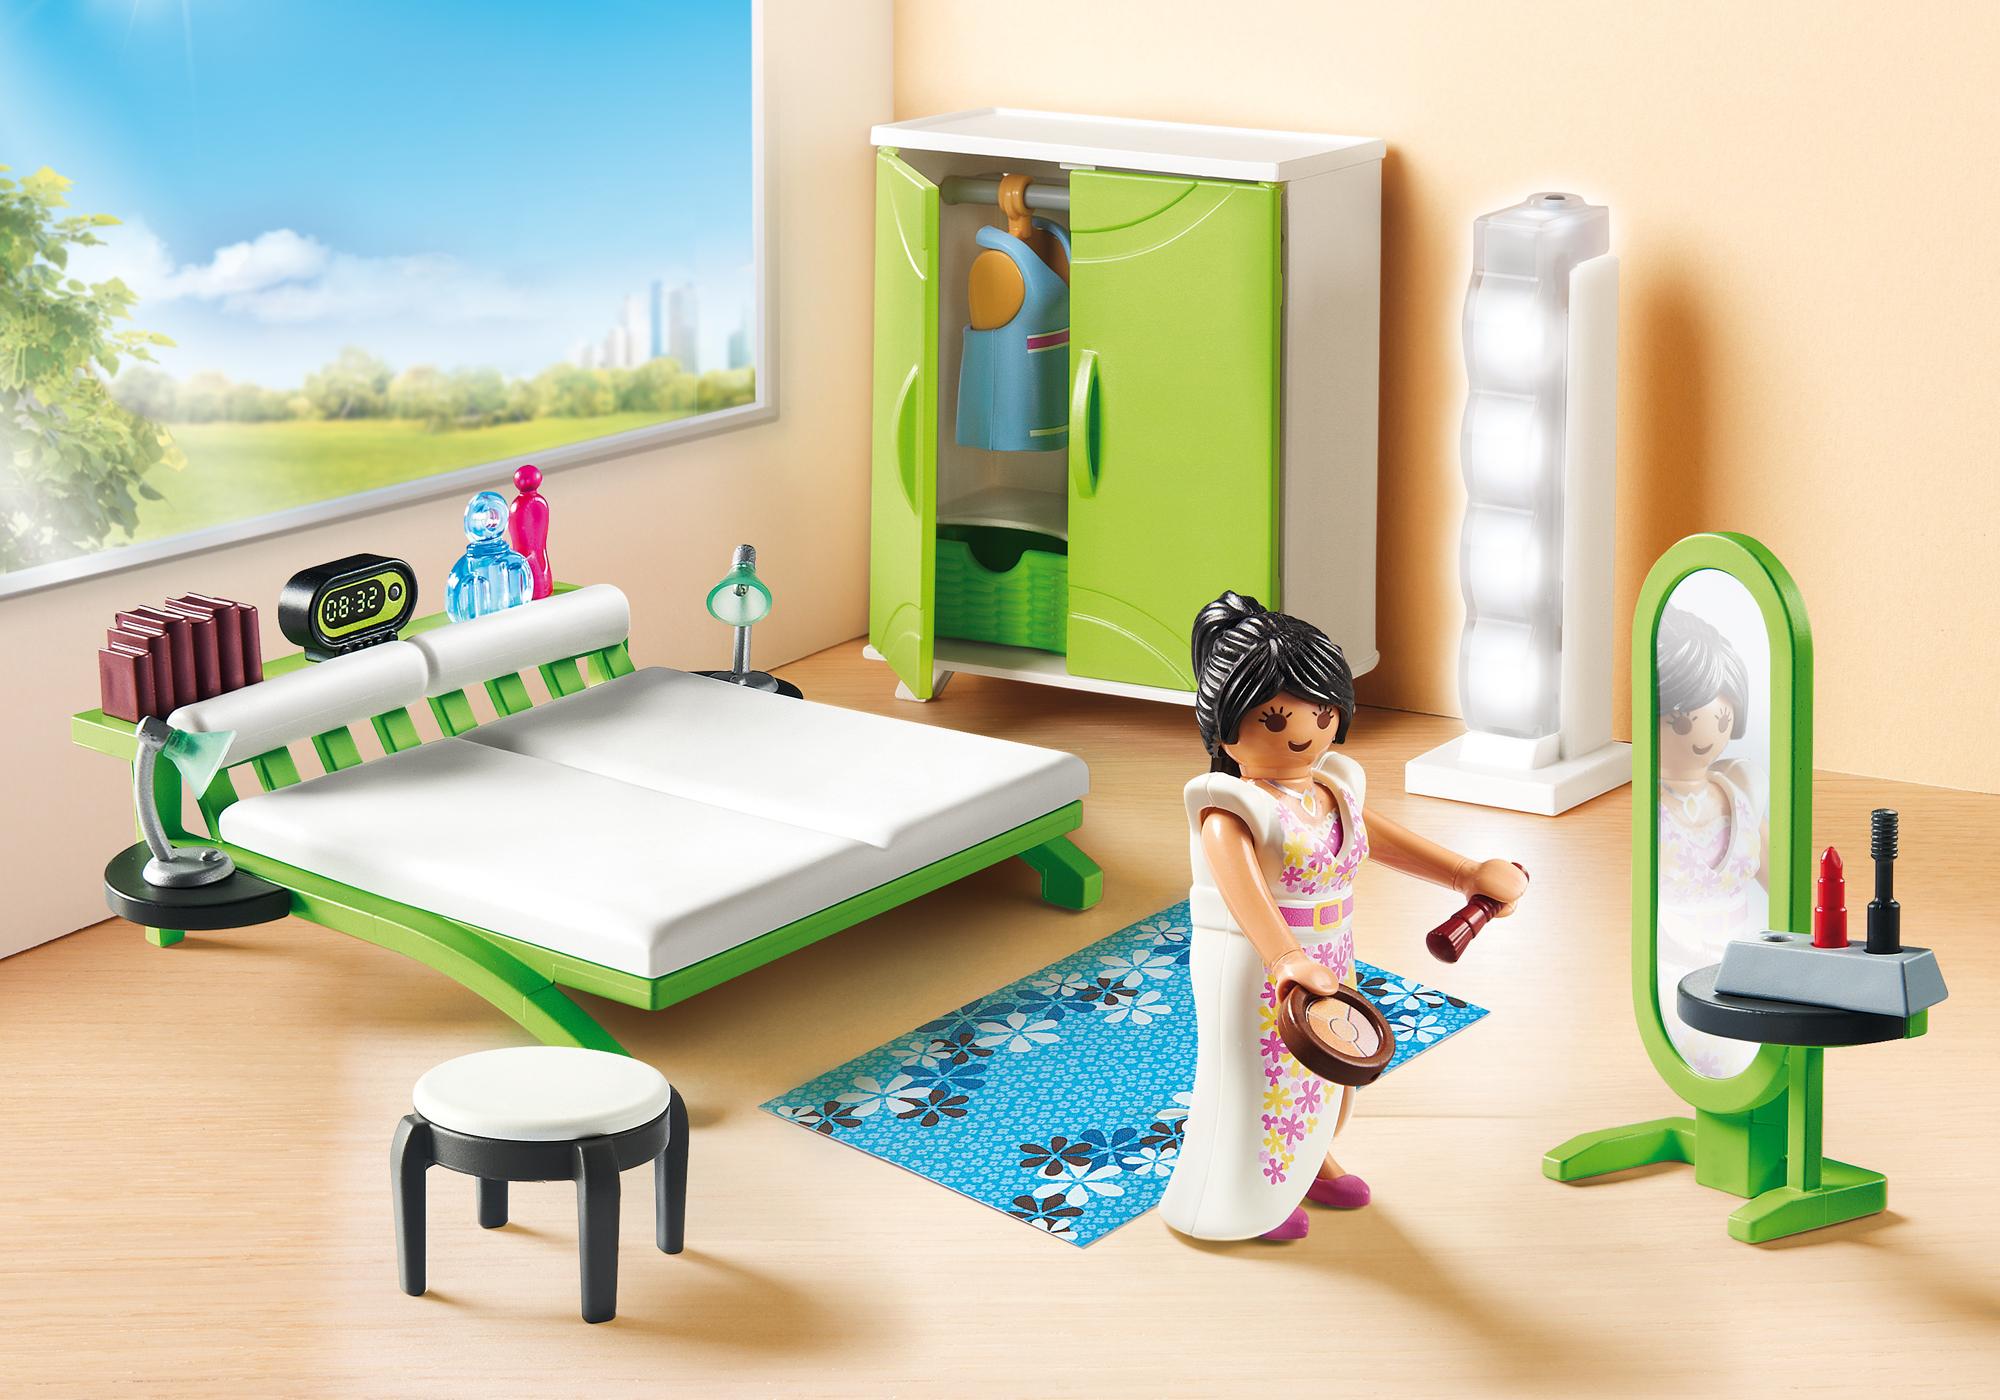 playmobil chambre adulte